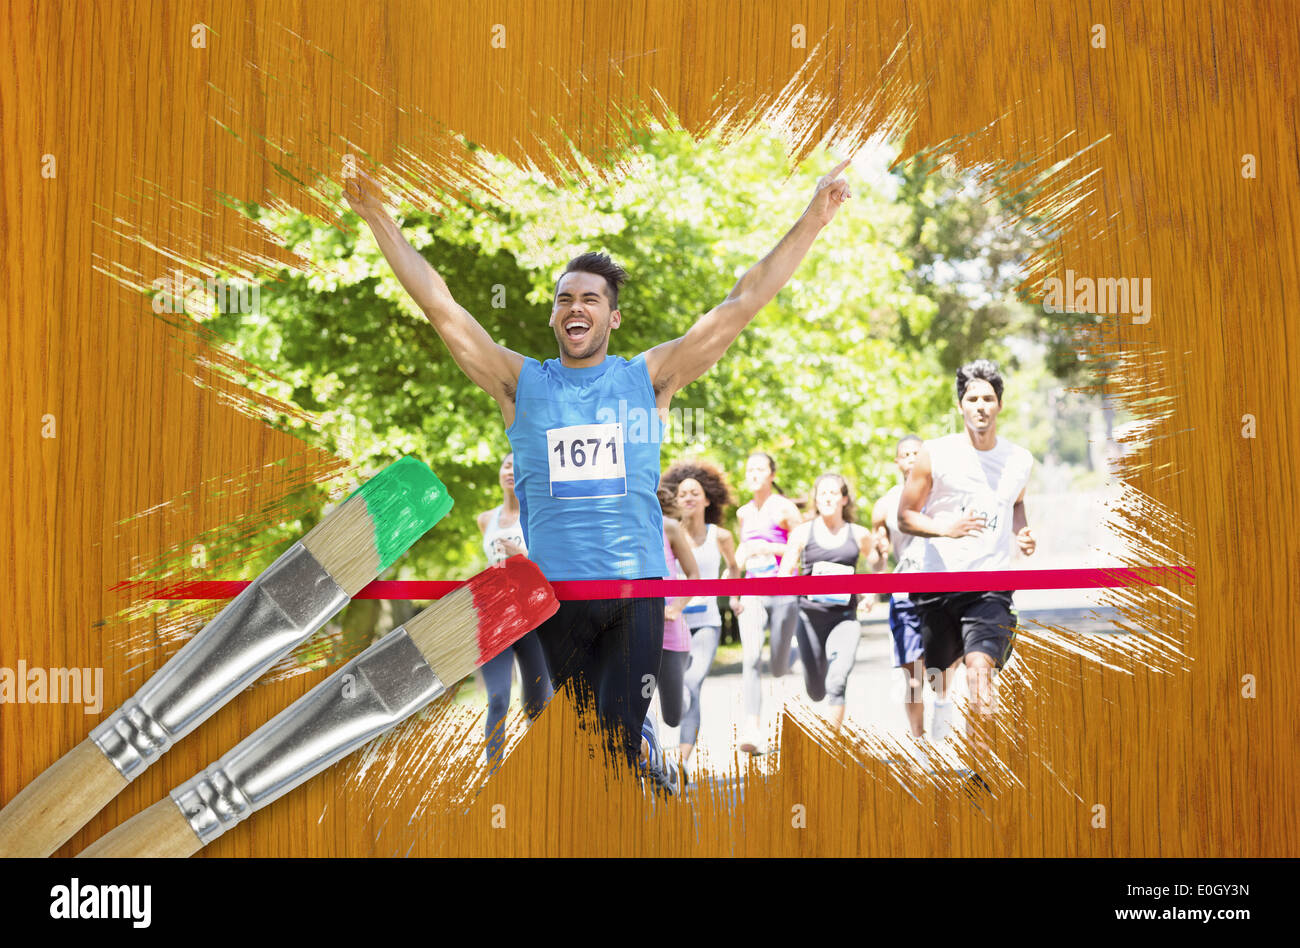 Composite image of racer crossing finishing line Stock Photo